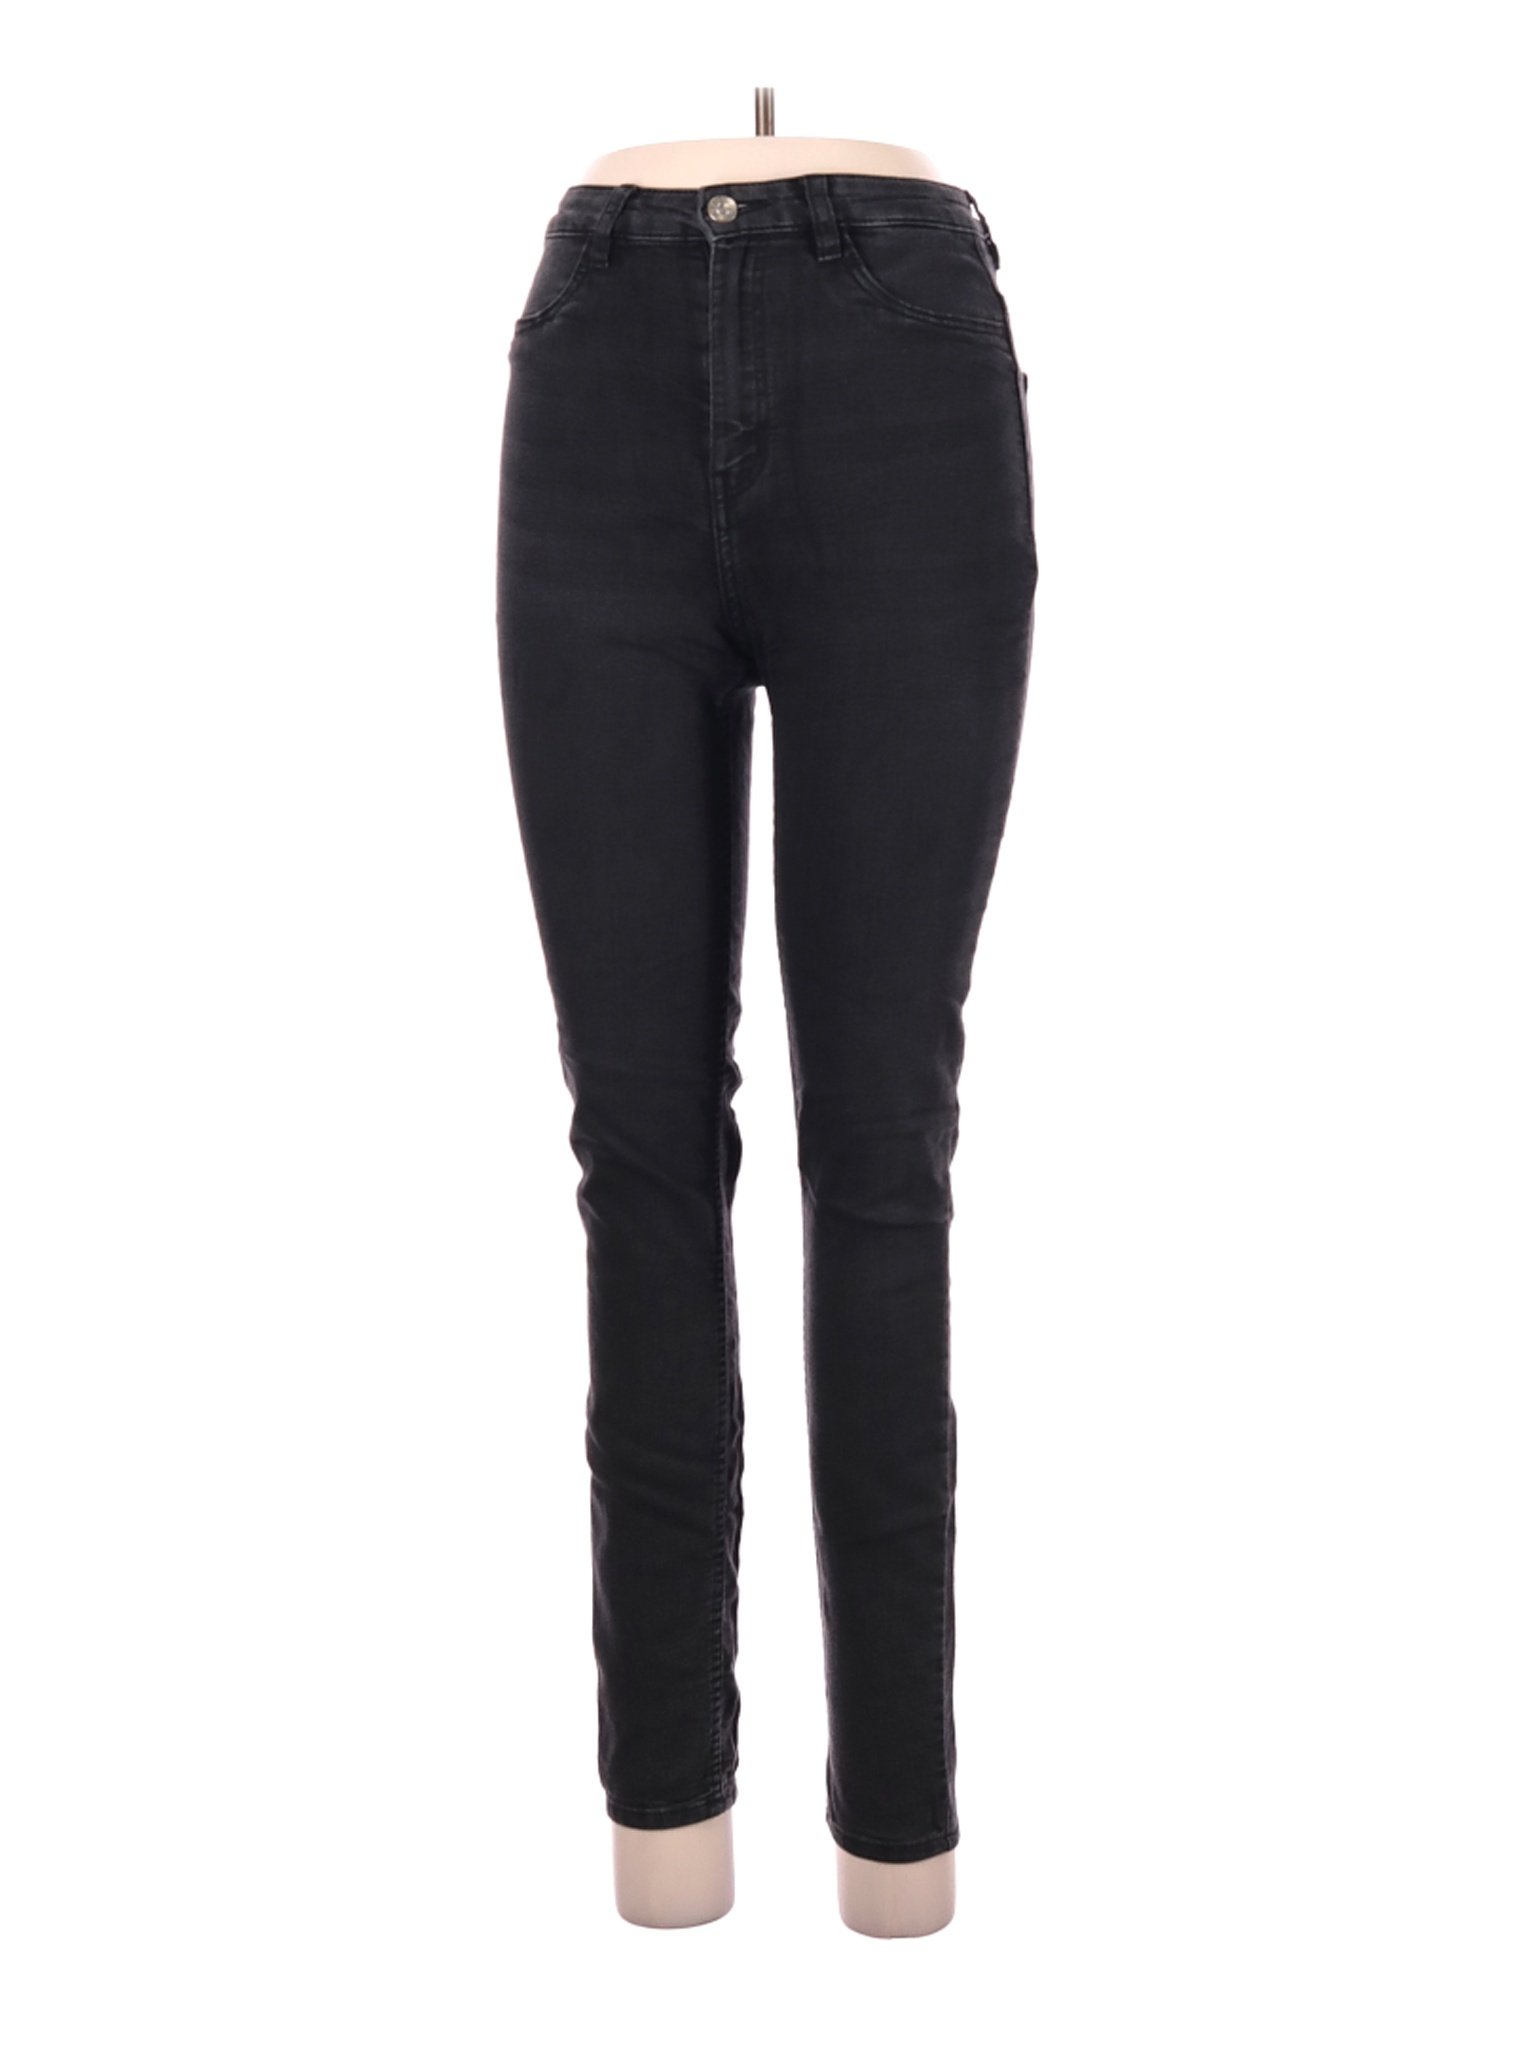 Divided by H&M Women Black Jeans 6 | eBay